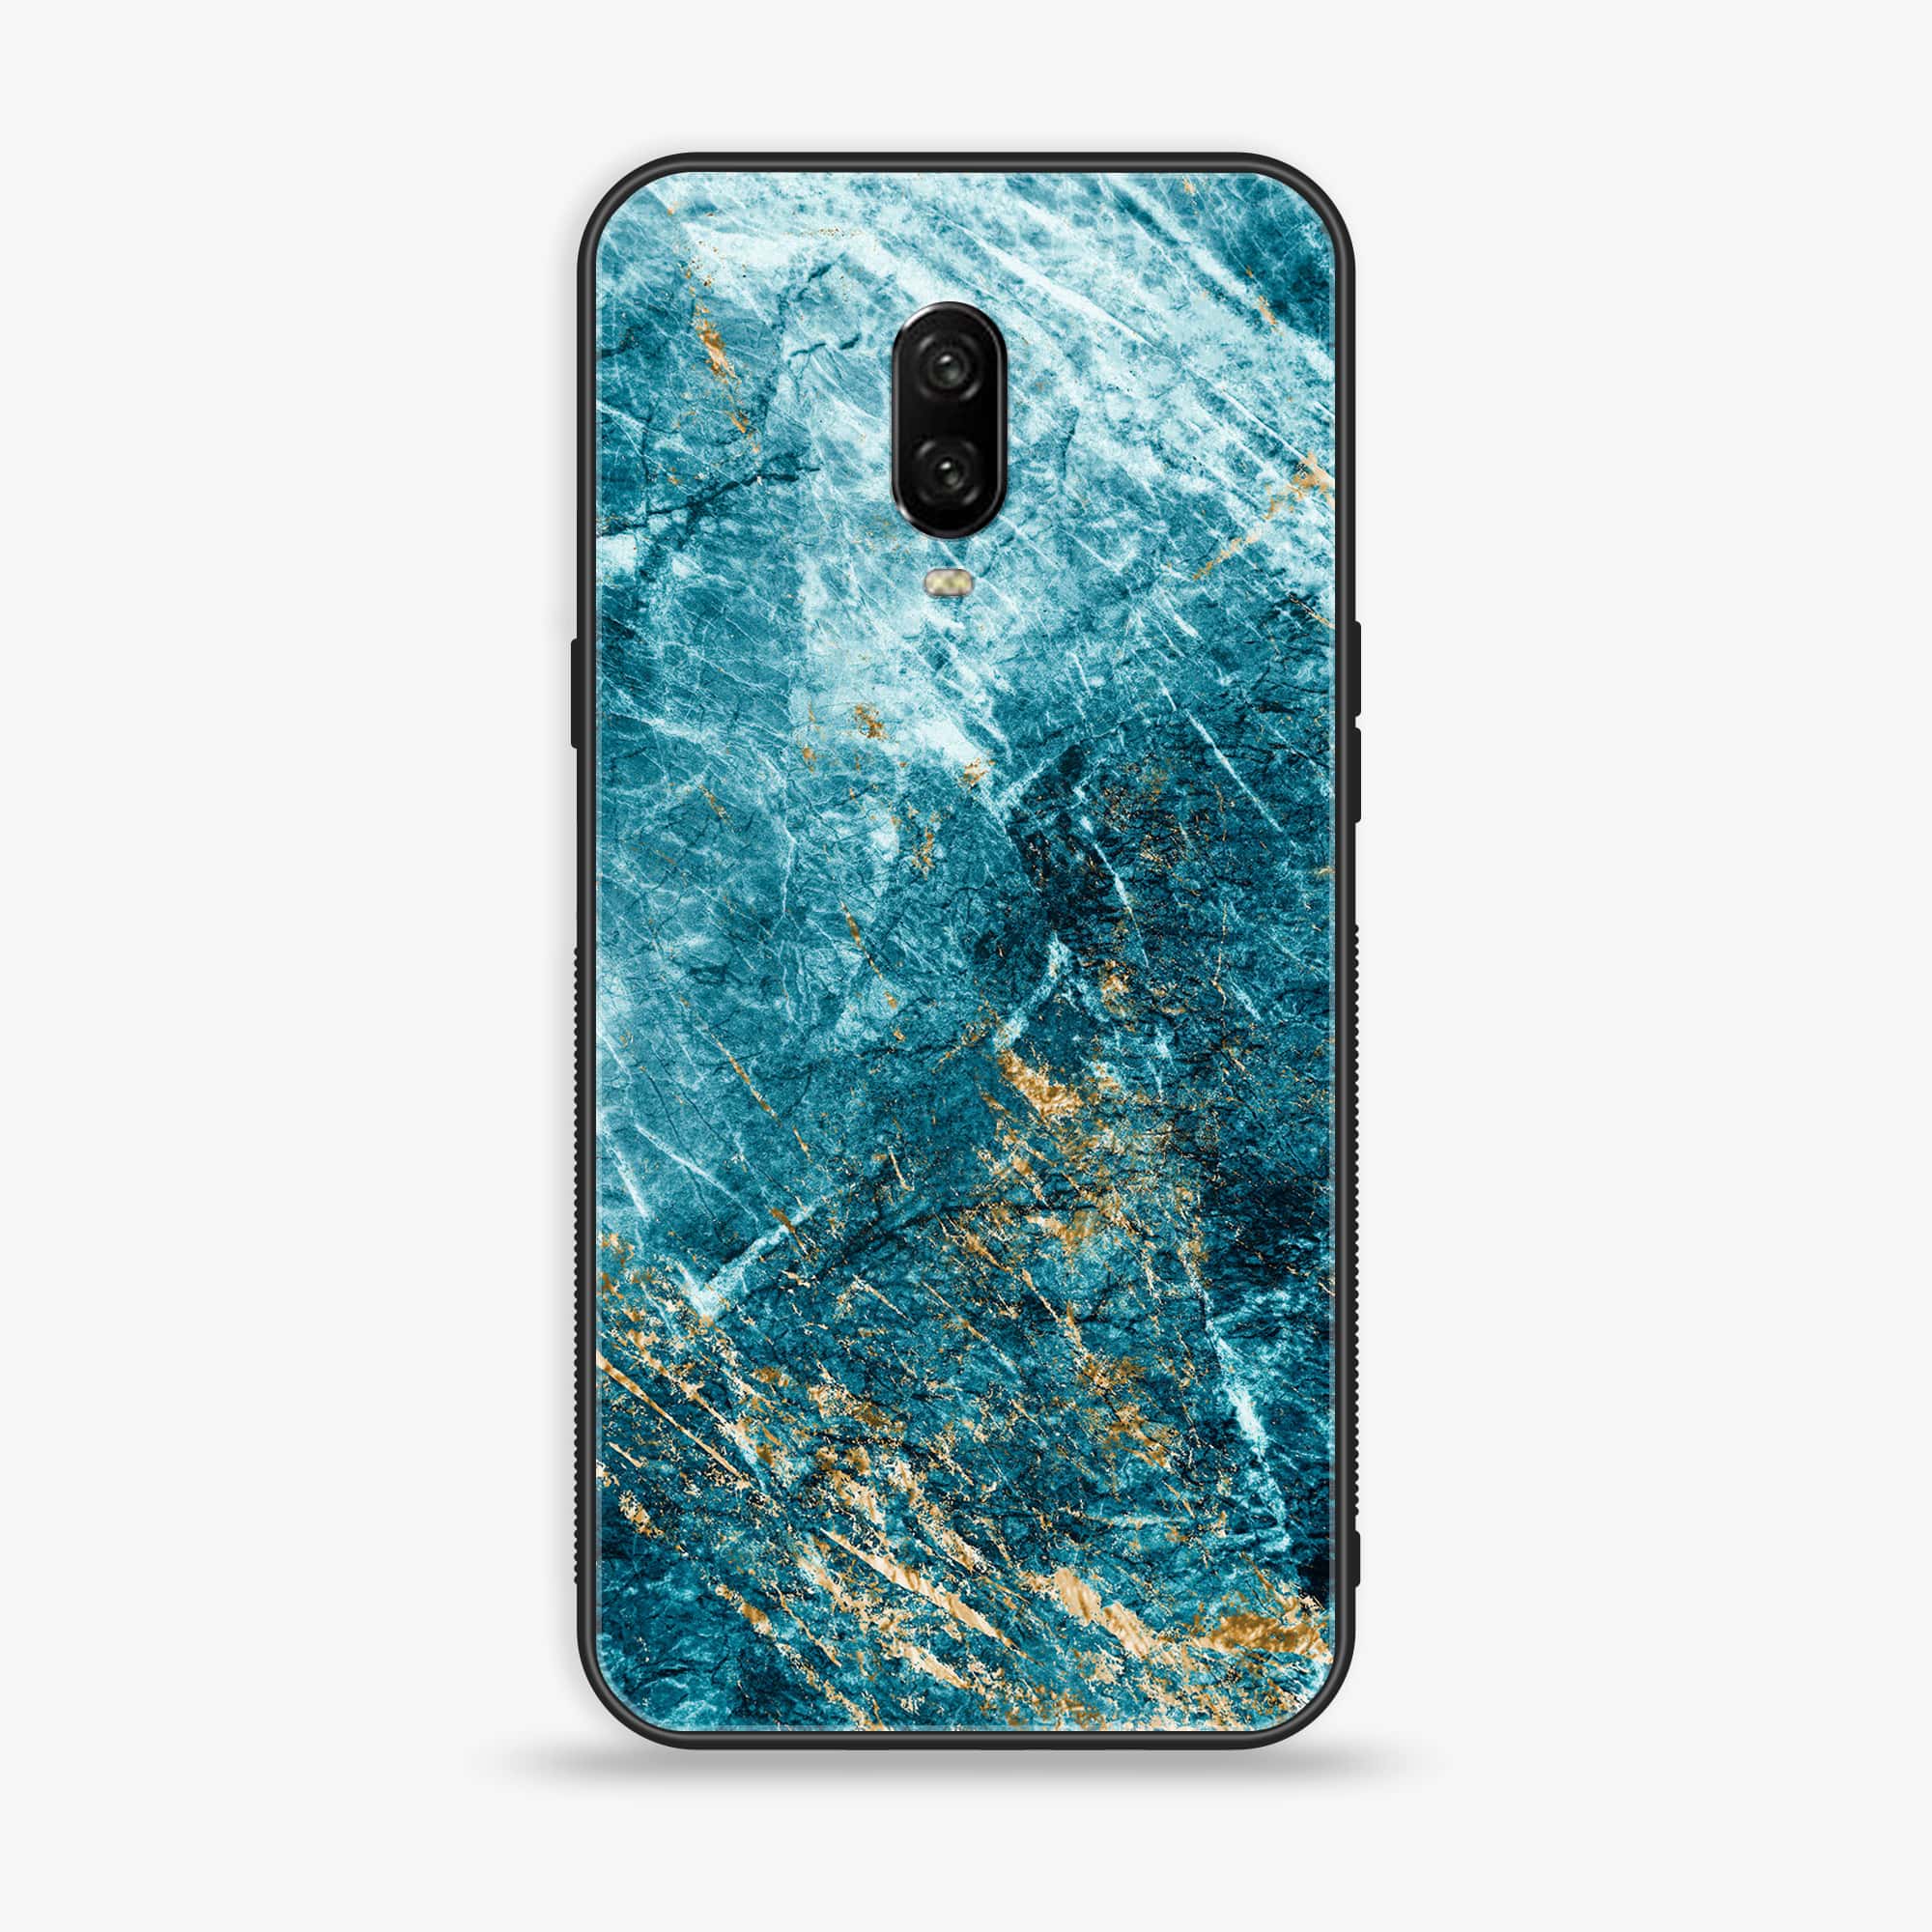 OnePlus 6T - Blue Marble Series V 2.0 - Premium Printed Glass soft Bumper shock Proof Case